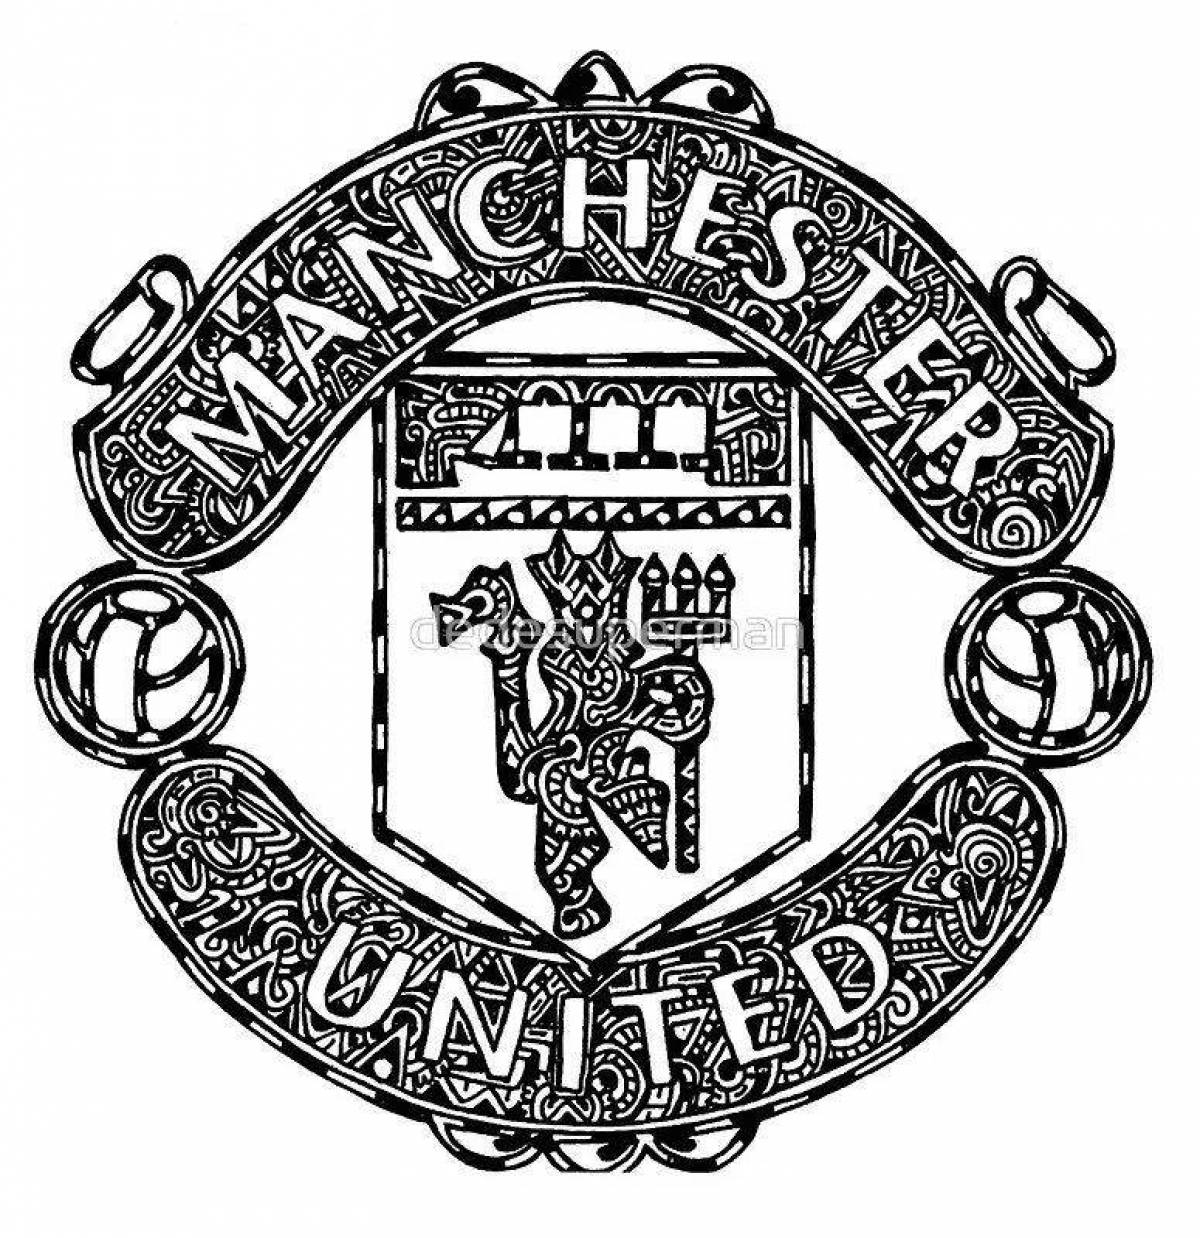 Manchester United fairytale coloring page